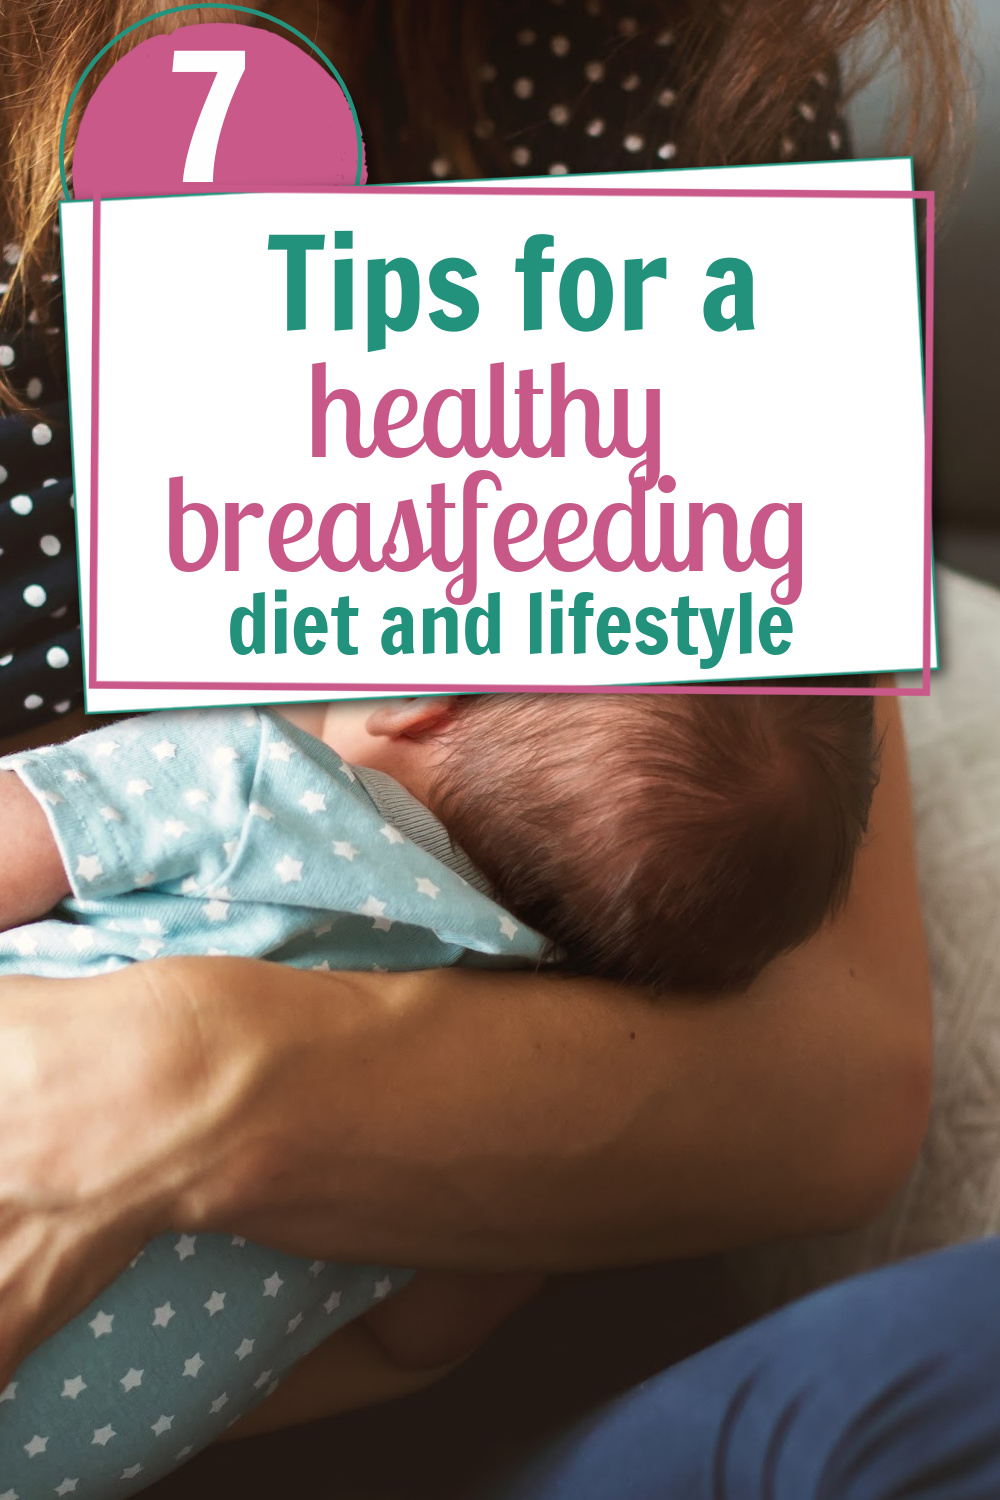 Breastfeeding is a natural process - but there are ways to make it a little more successful and healthy for both mom and baby. Here are seven essential tips fora healthy breastfeeding diet and lifestyle.